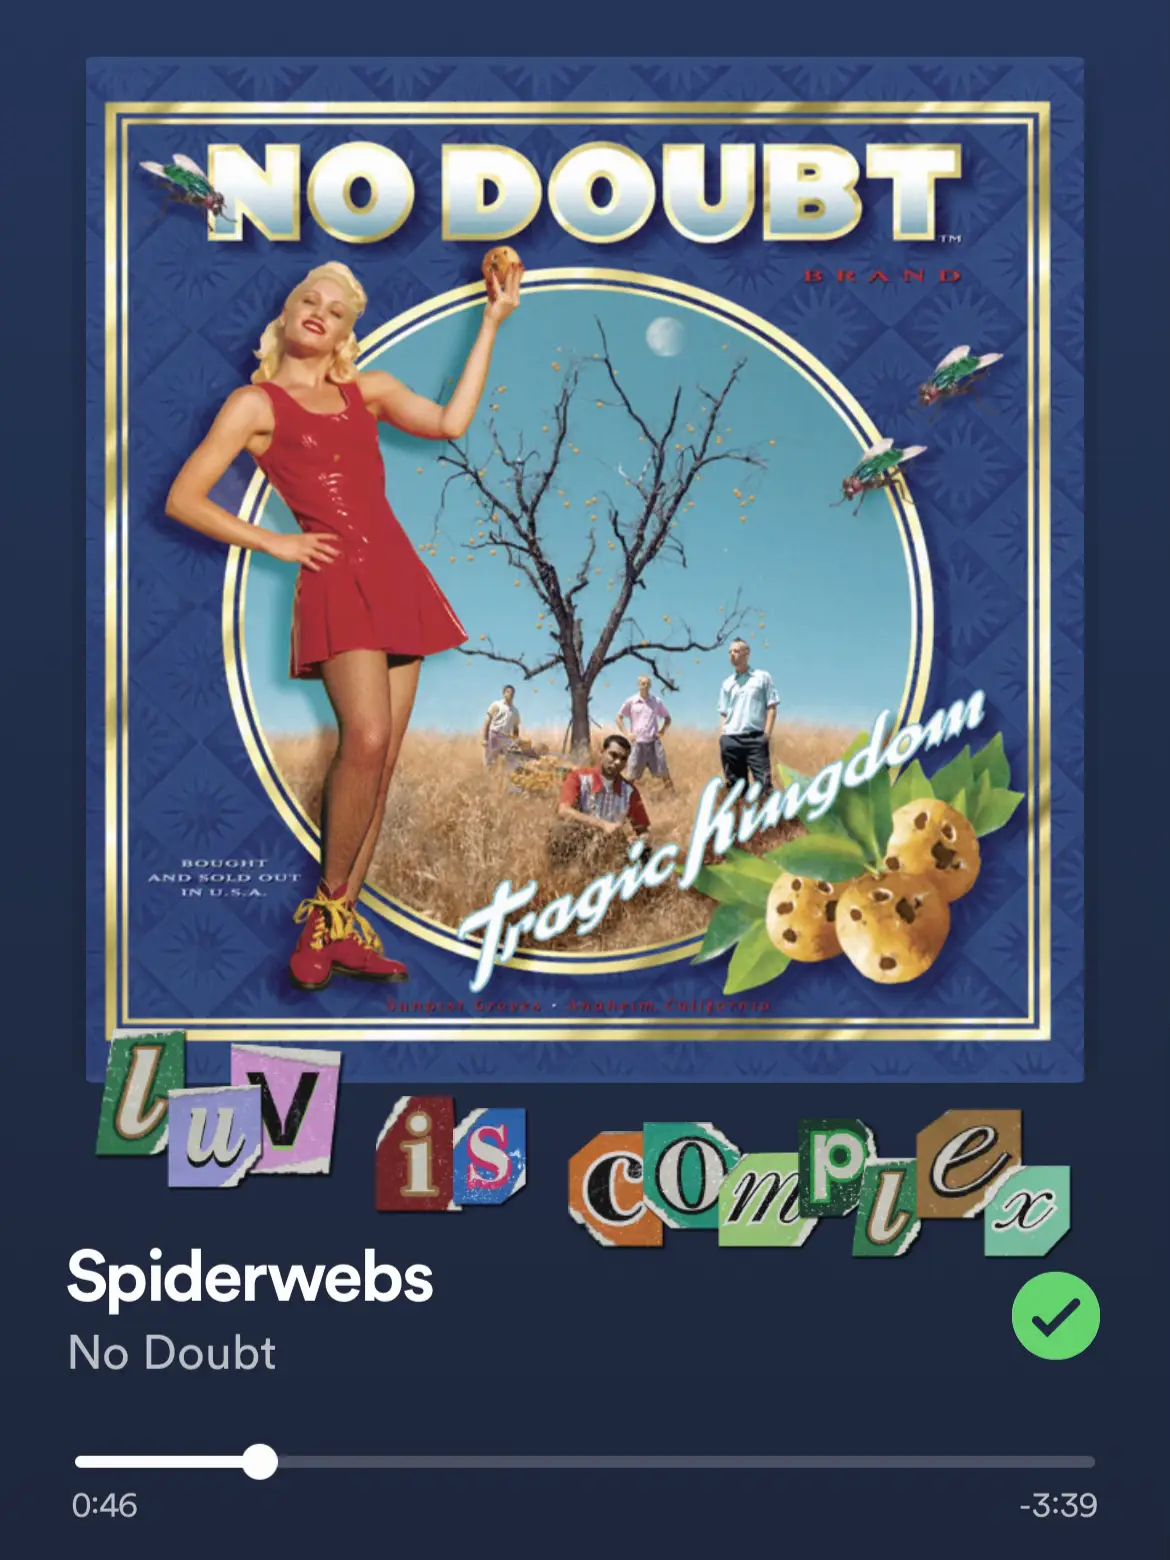  An album cover for Spiderwebs by No Doubt.